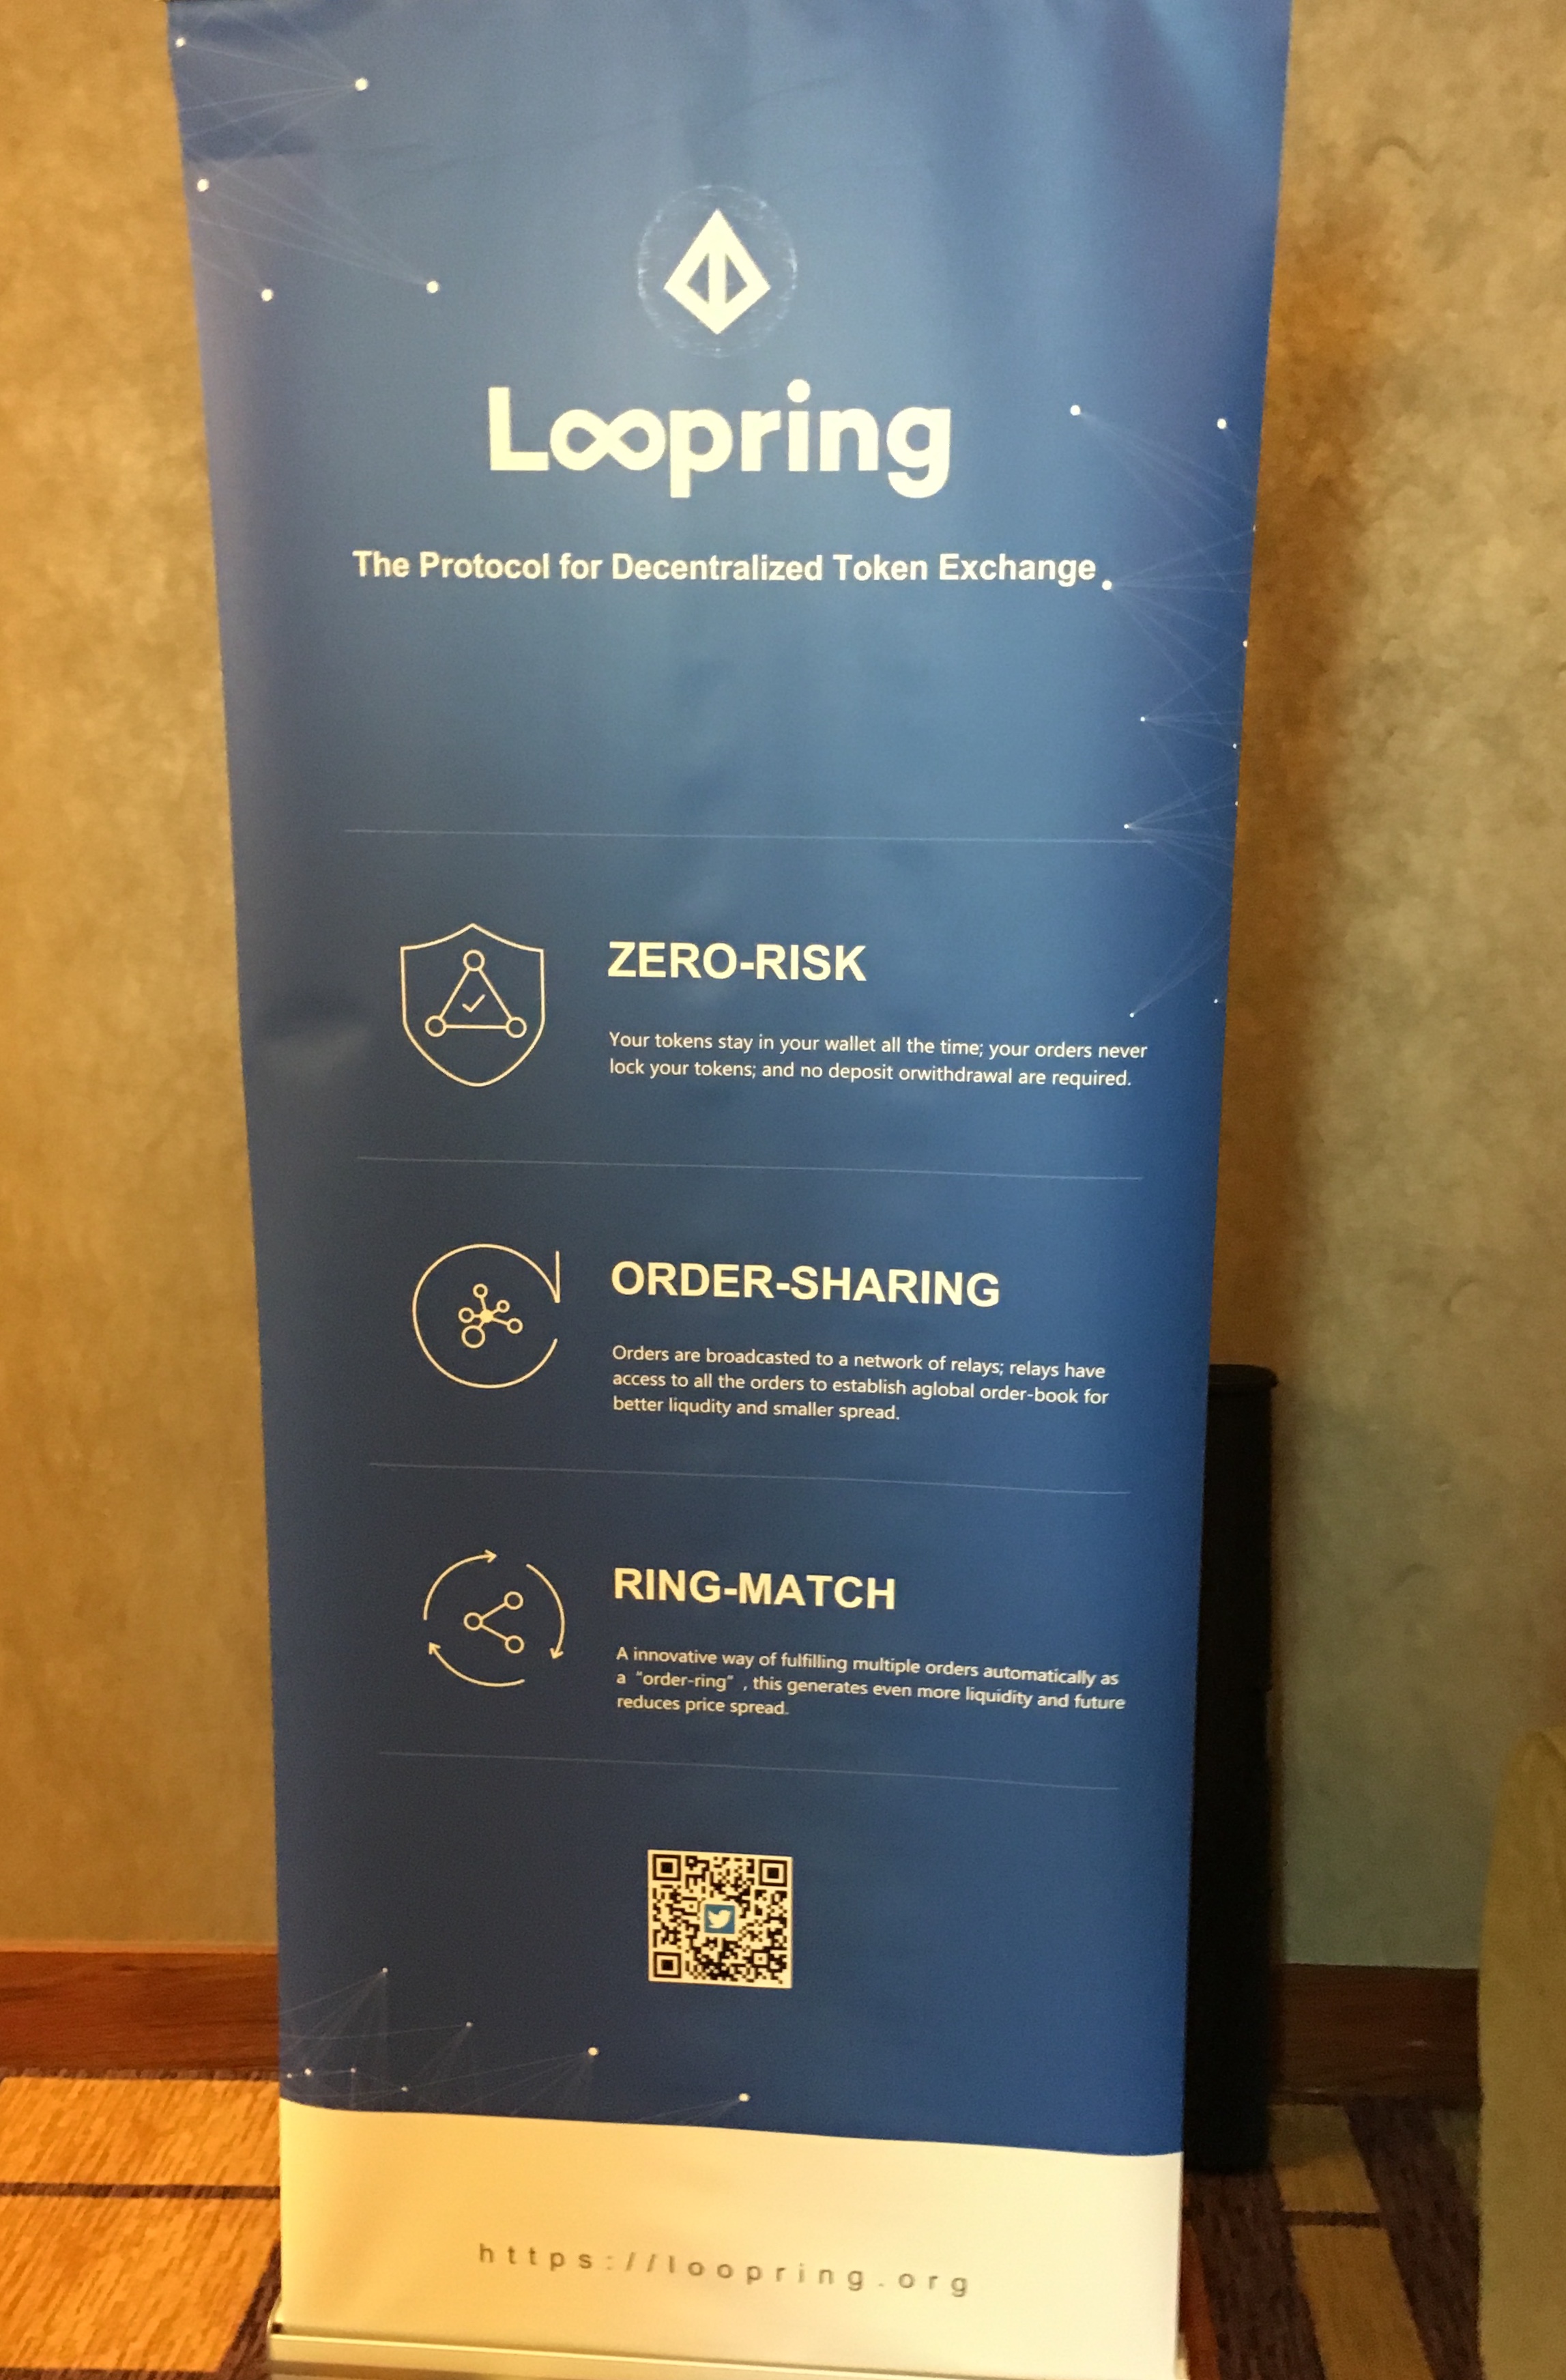 Loopring's Protocol to Decentralized Token Exchange